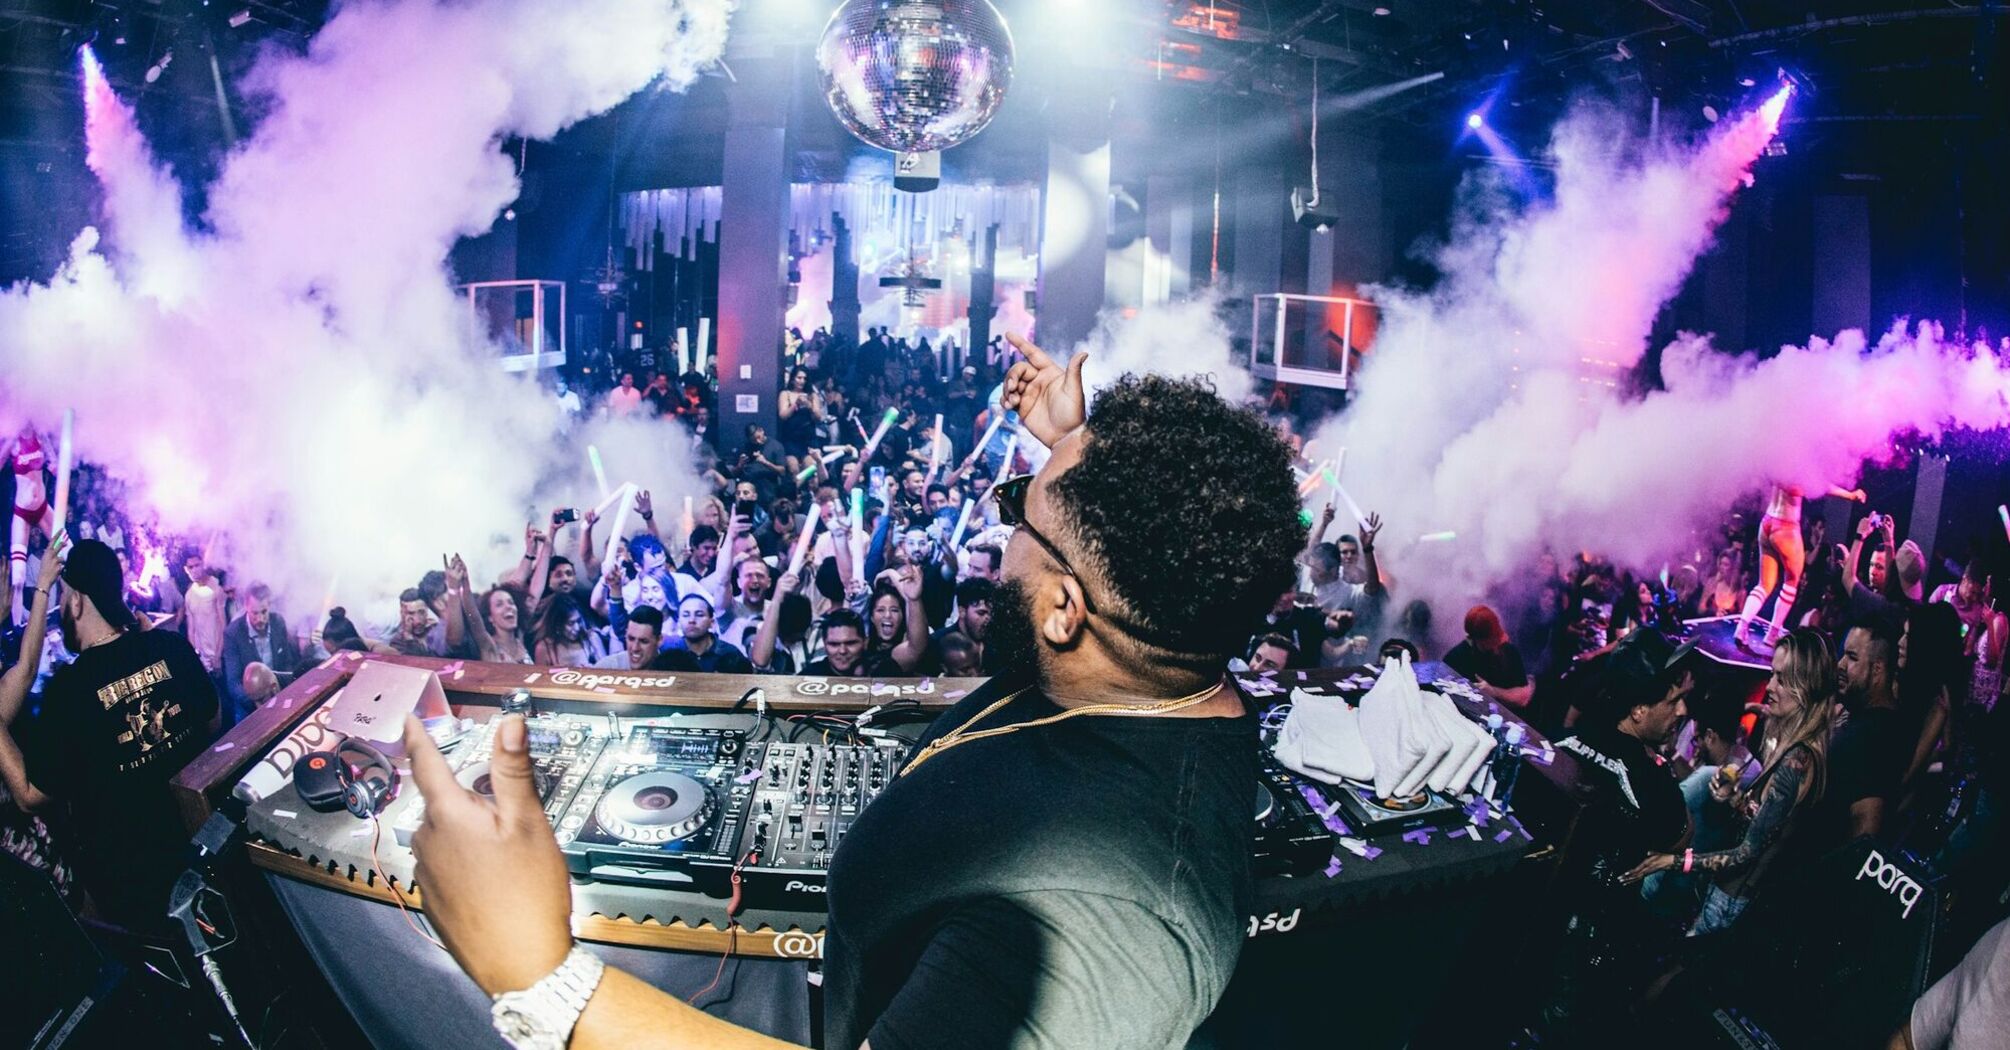 DJ playing at a nightclub with vibrant crowd and smoke effects